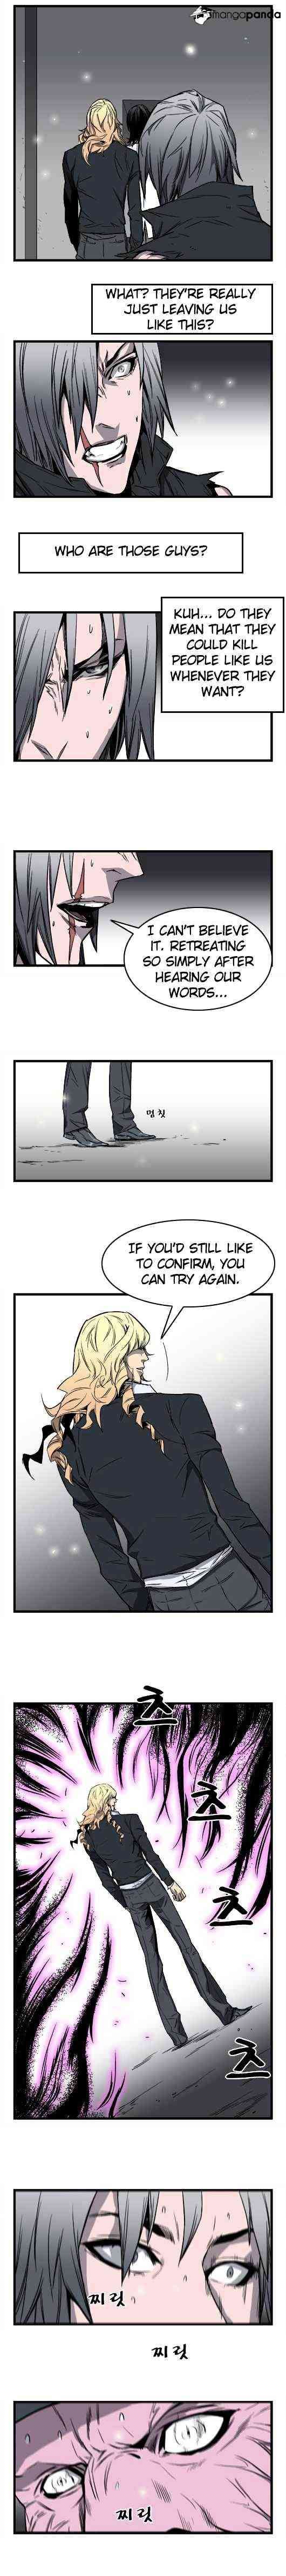 Noblesse Chapter 33 page 3